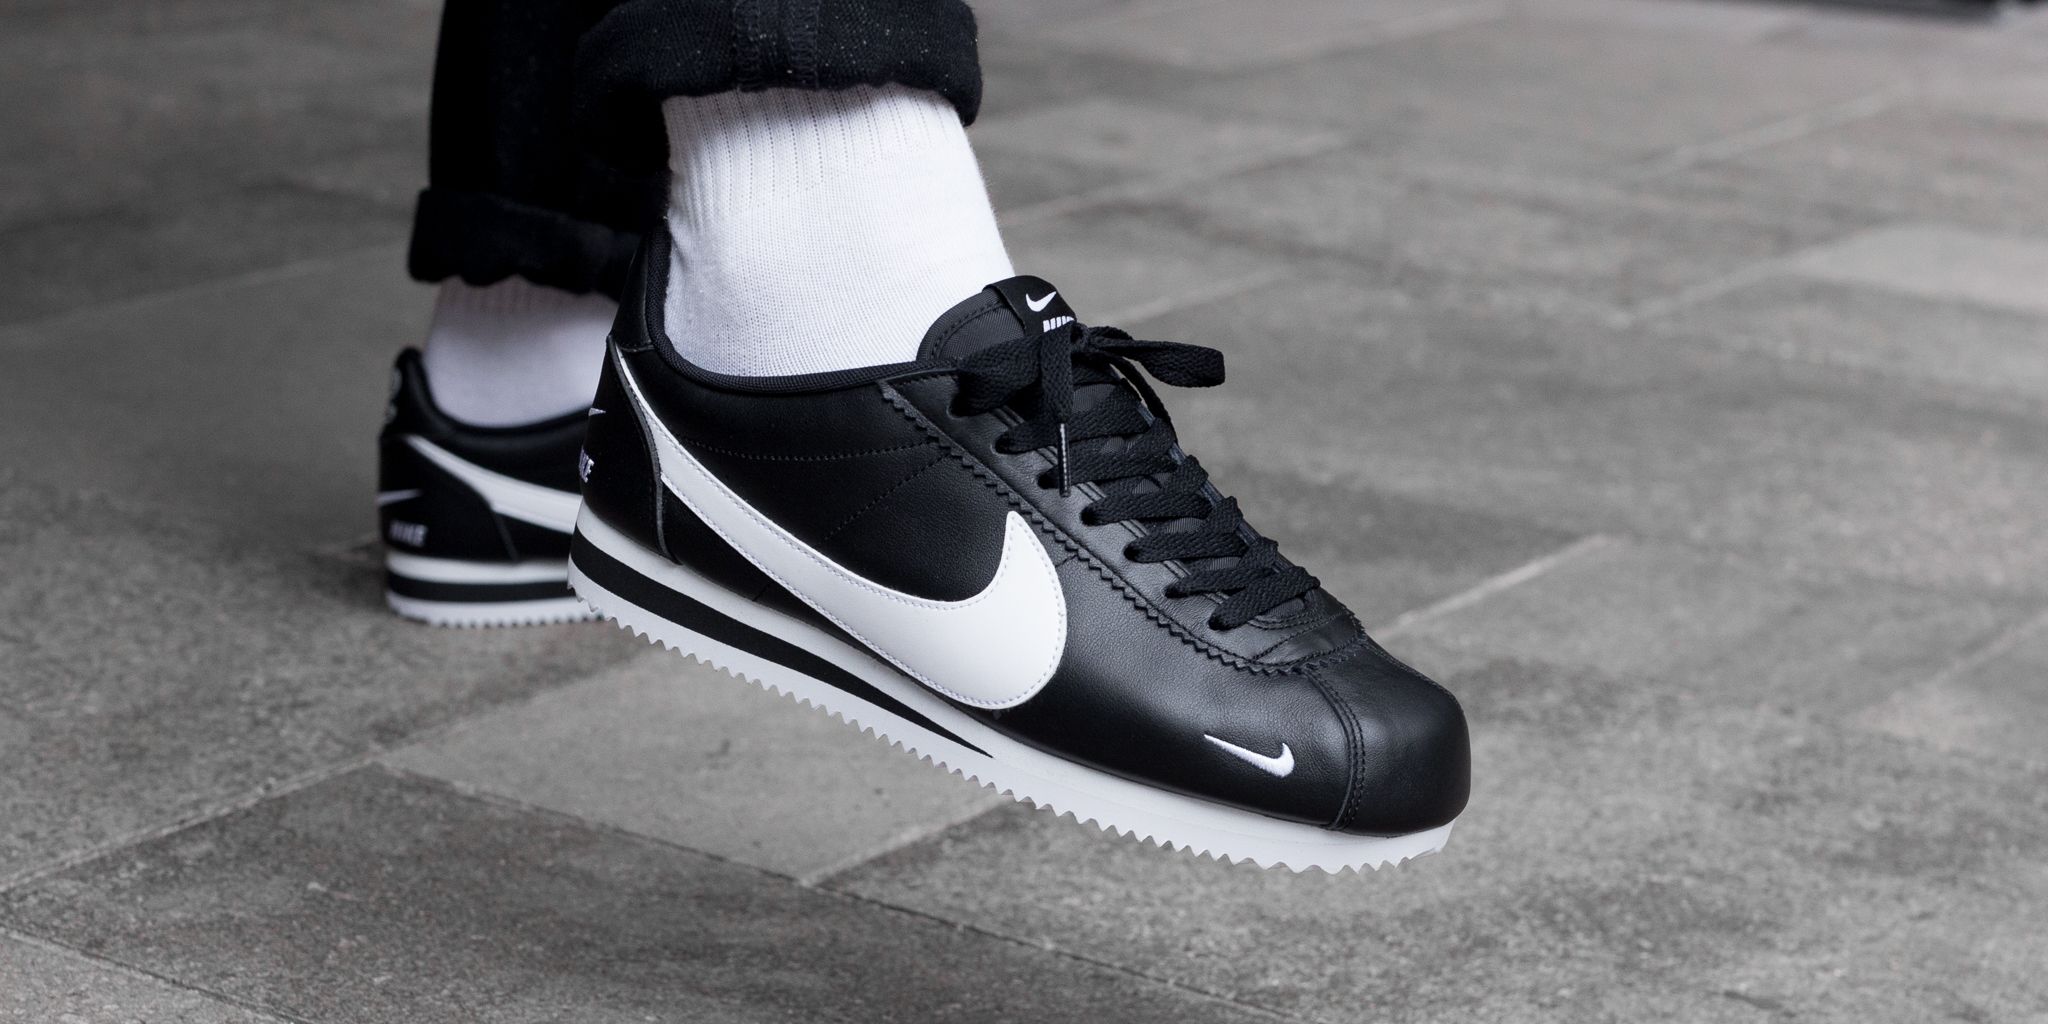 Titolo on Twitter: "check out the latest Nike Classic Cortez Premium with multiple mini swooshes in to the webSHOP ➡️ https://t.co/1tF1rNrTa4 US 7 (40) - US 11 (45) style code 🔎